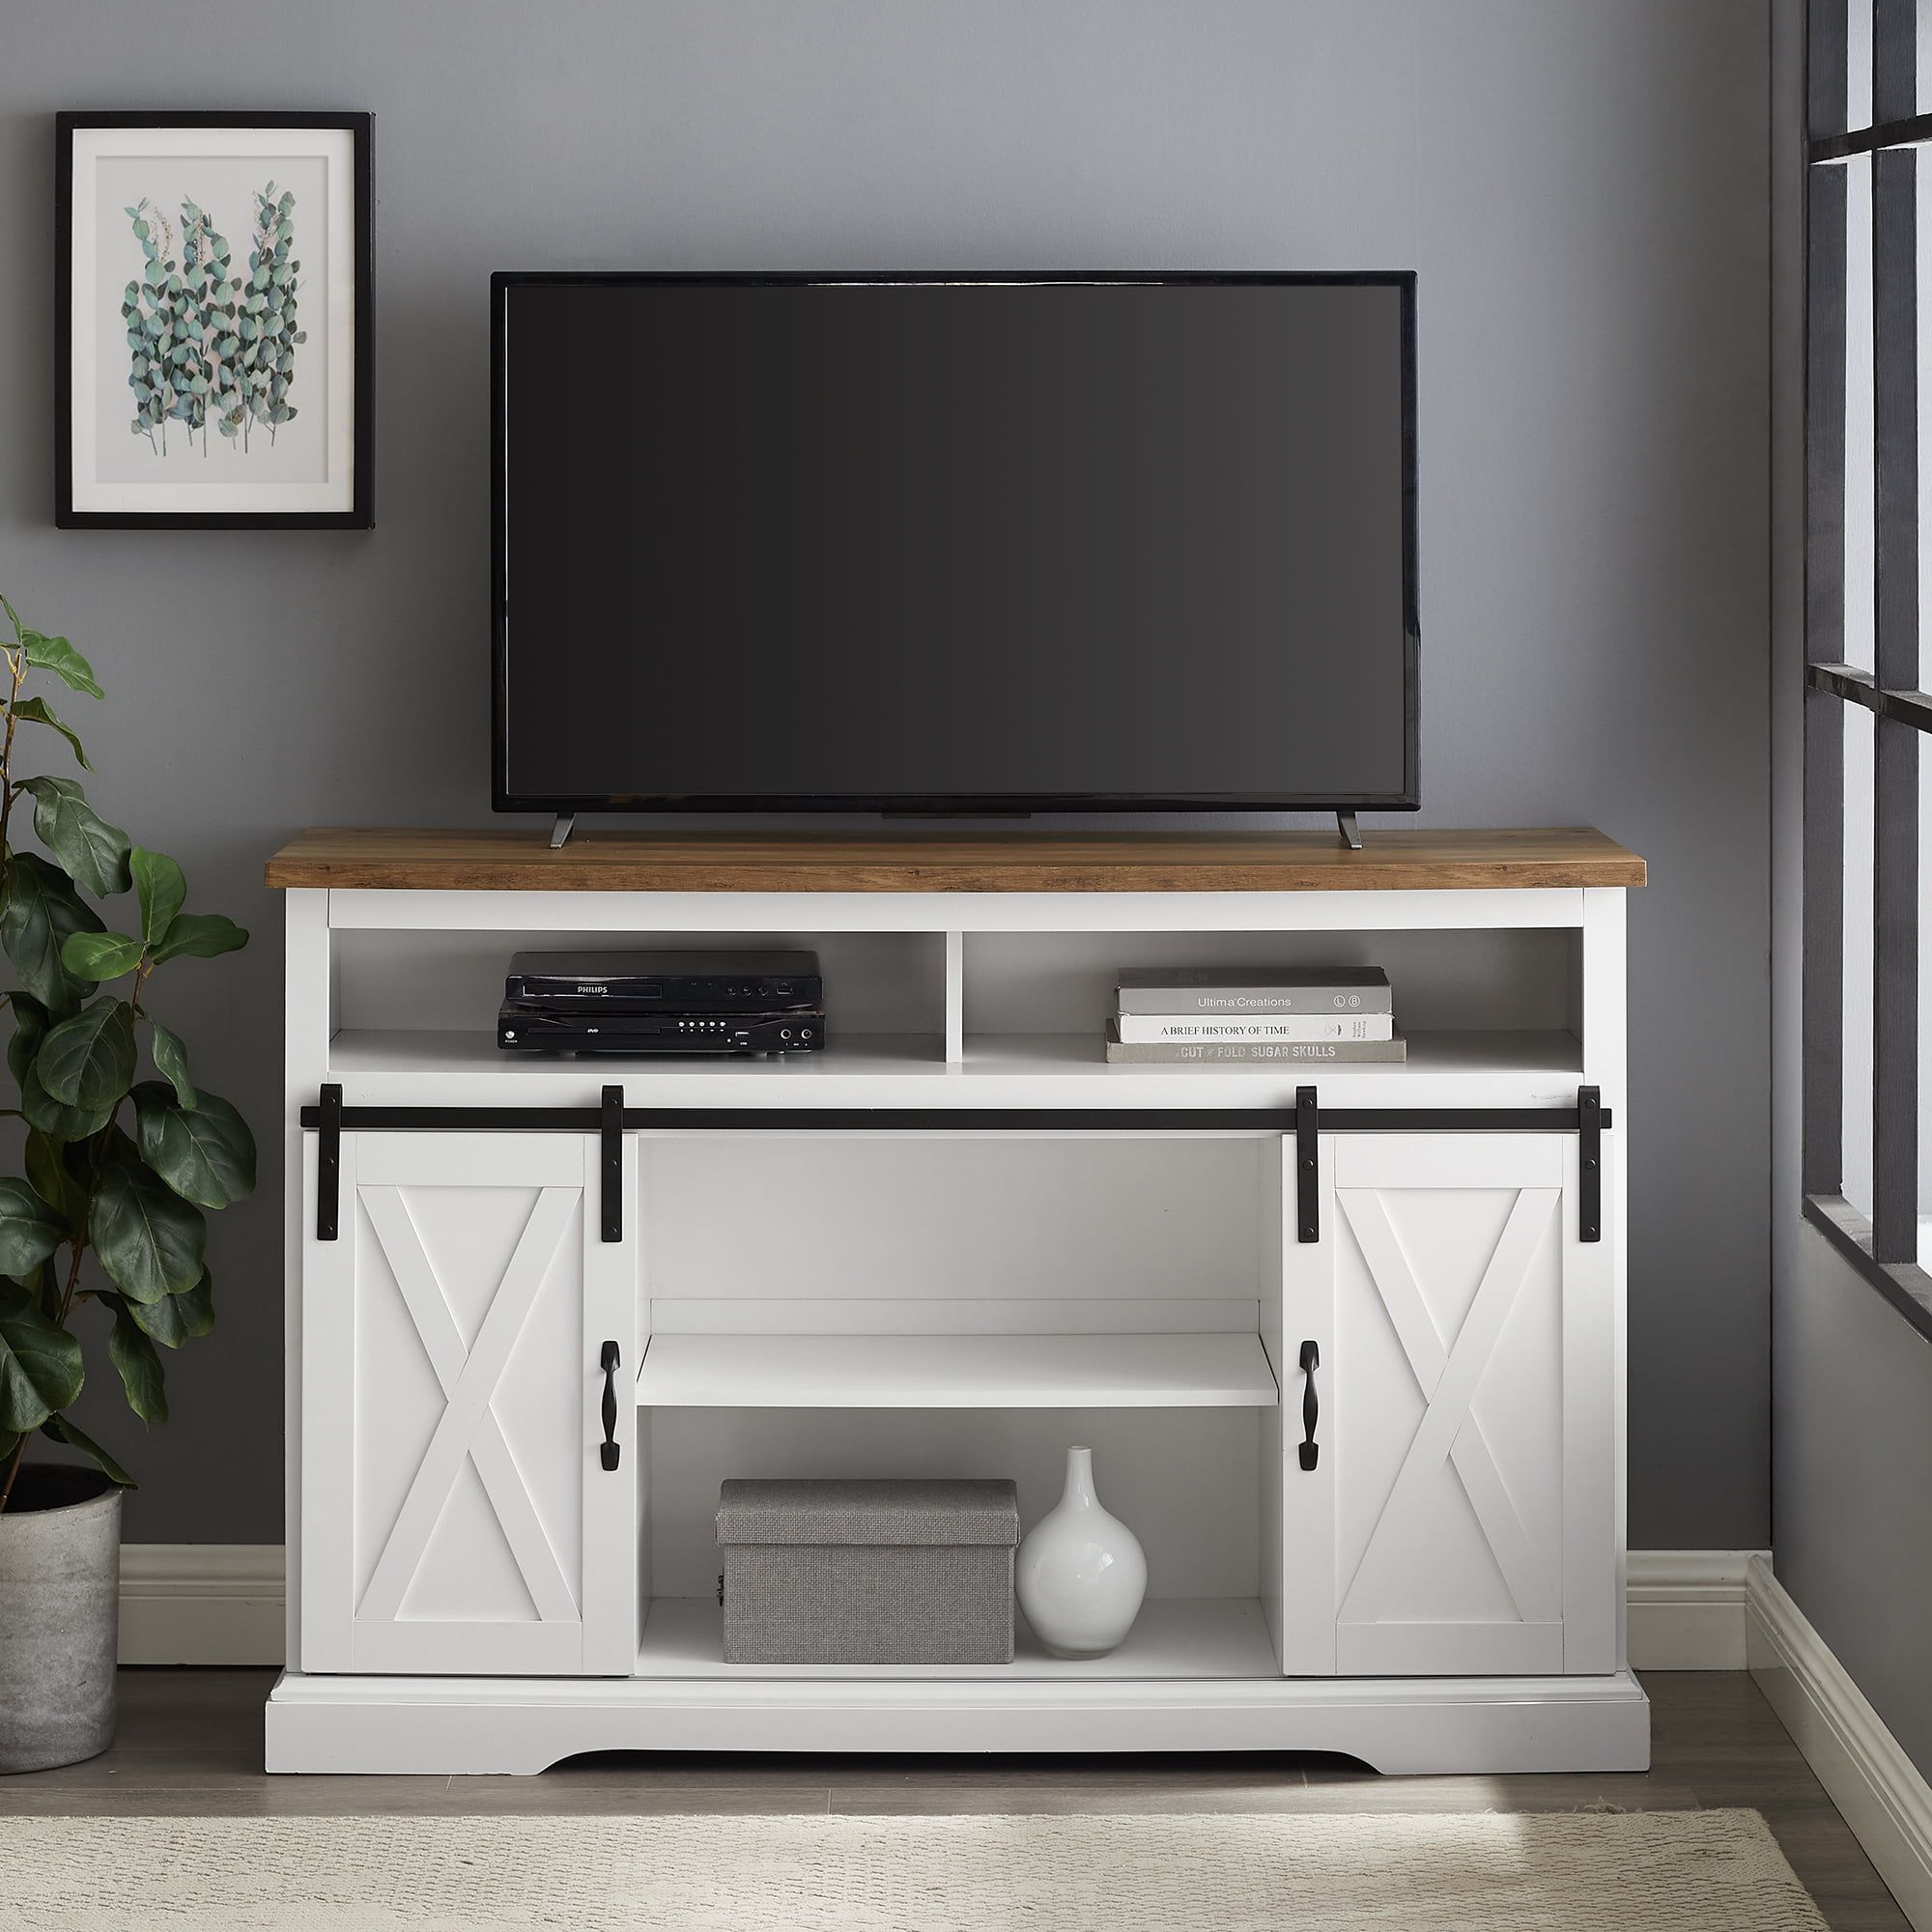 Manor Park Farmhouse Tv Stand For Tvs Up To 58", White/reclaimed Regarding Farmhouse Stands For Tvs (View 6 of 20)